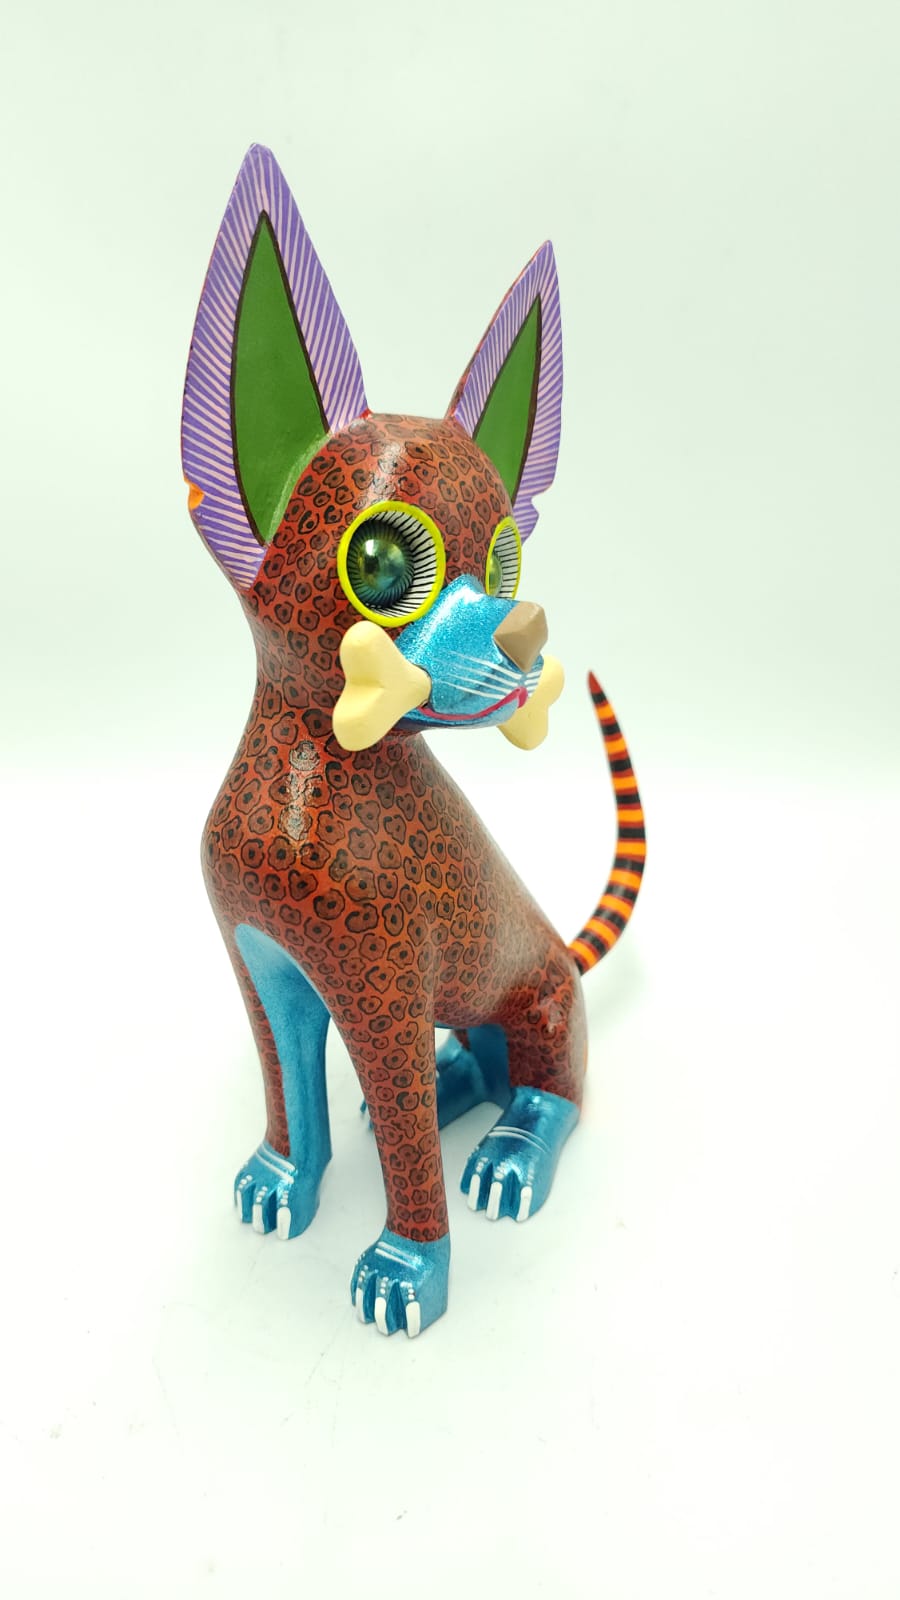 Great Mexican Oaxacan Wood Carving Alebrije Chihuahua By Isaac Fabian PP5435